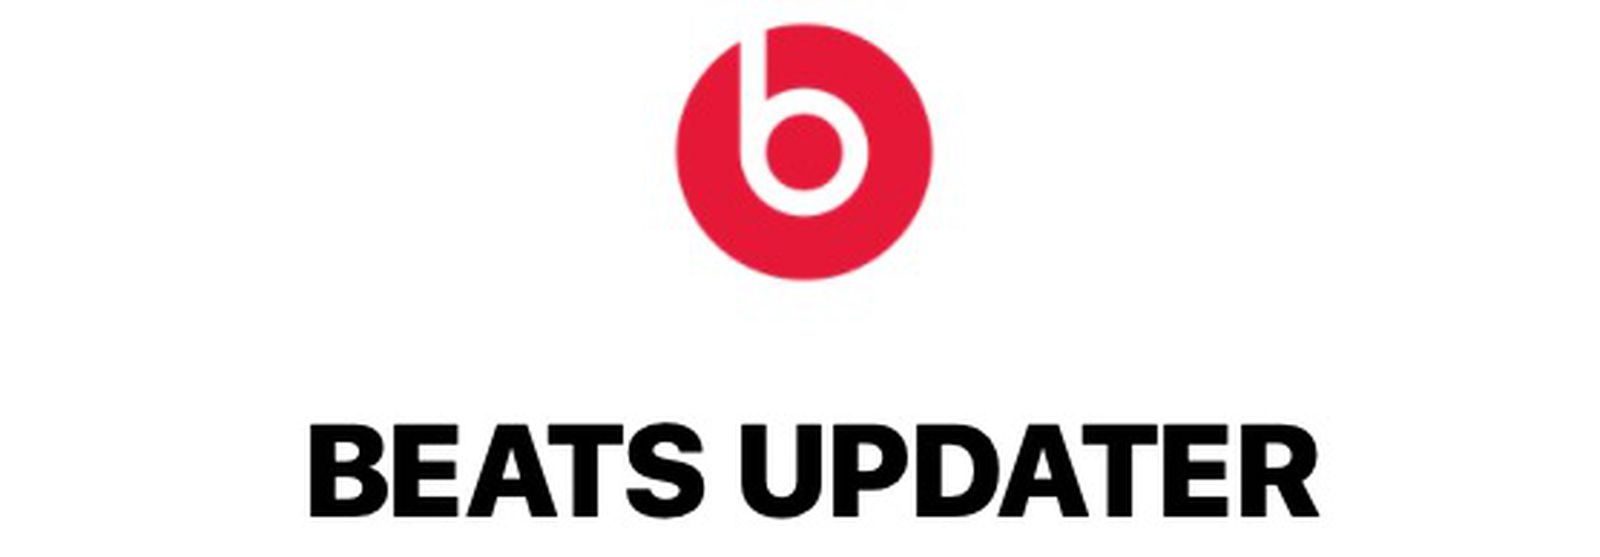 Apple Retires Beats Updater Utility Favor of Over-the-Air Firmware Updates